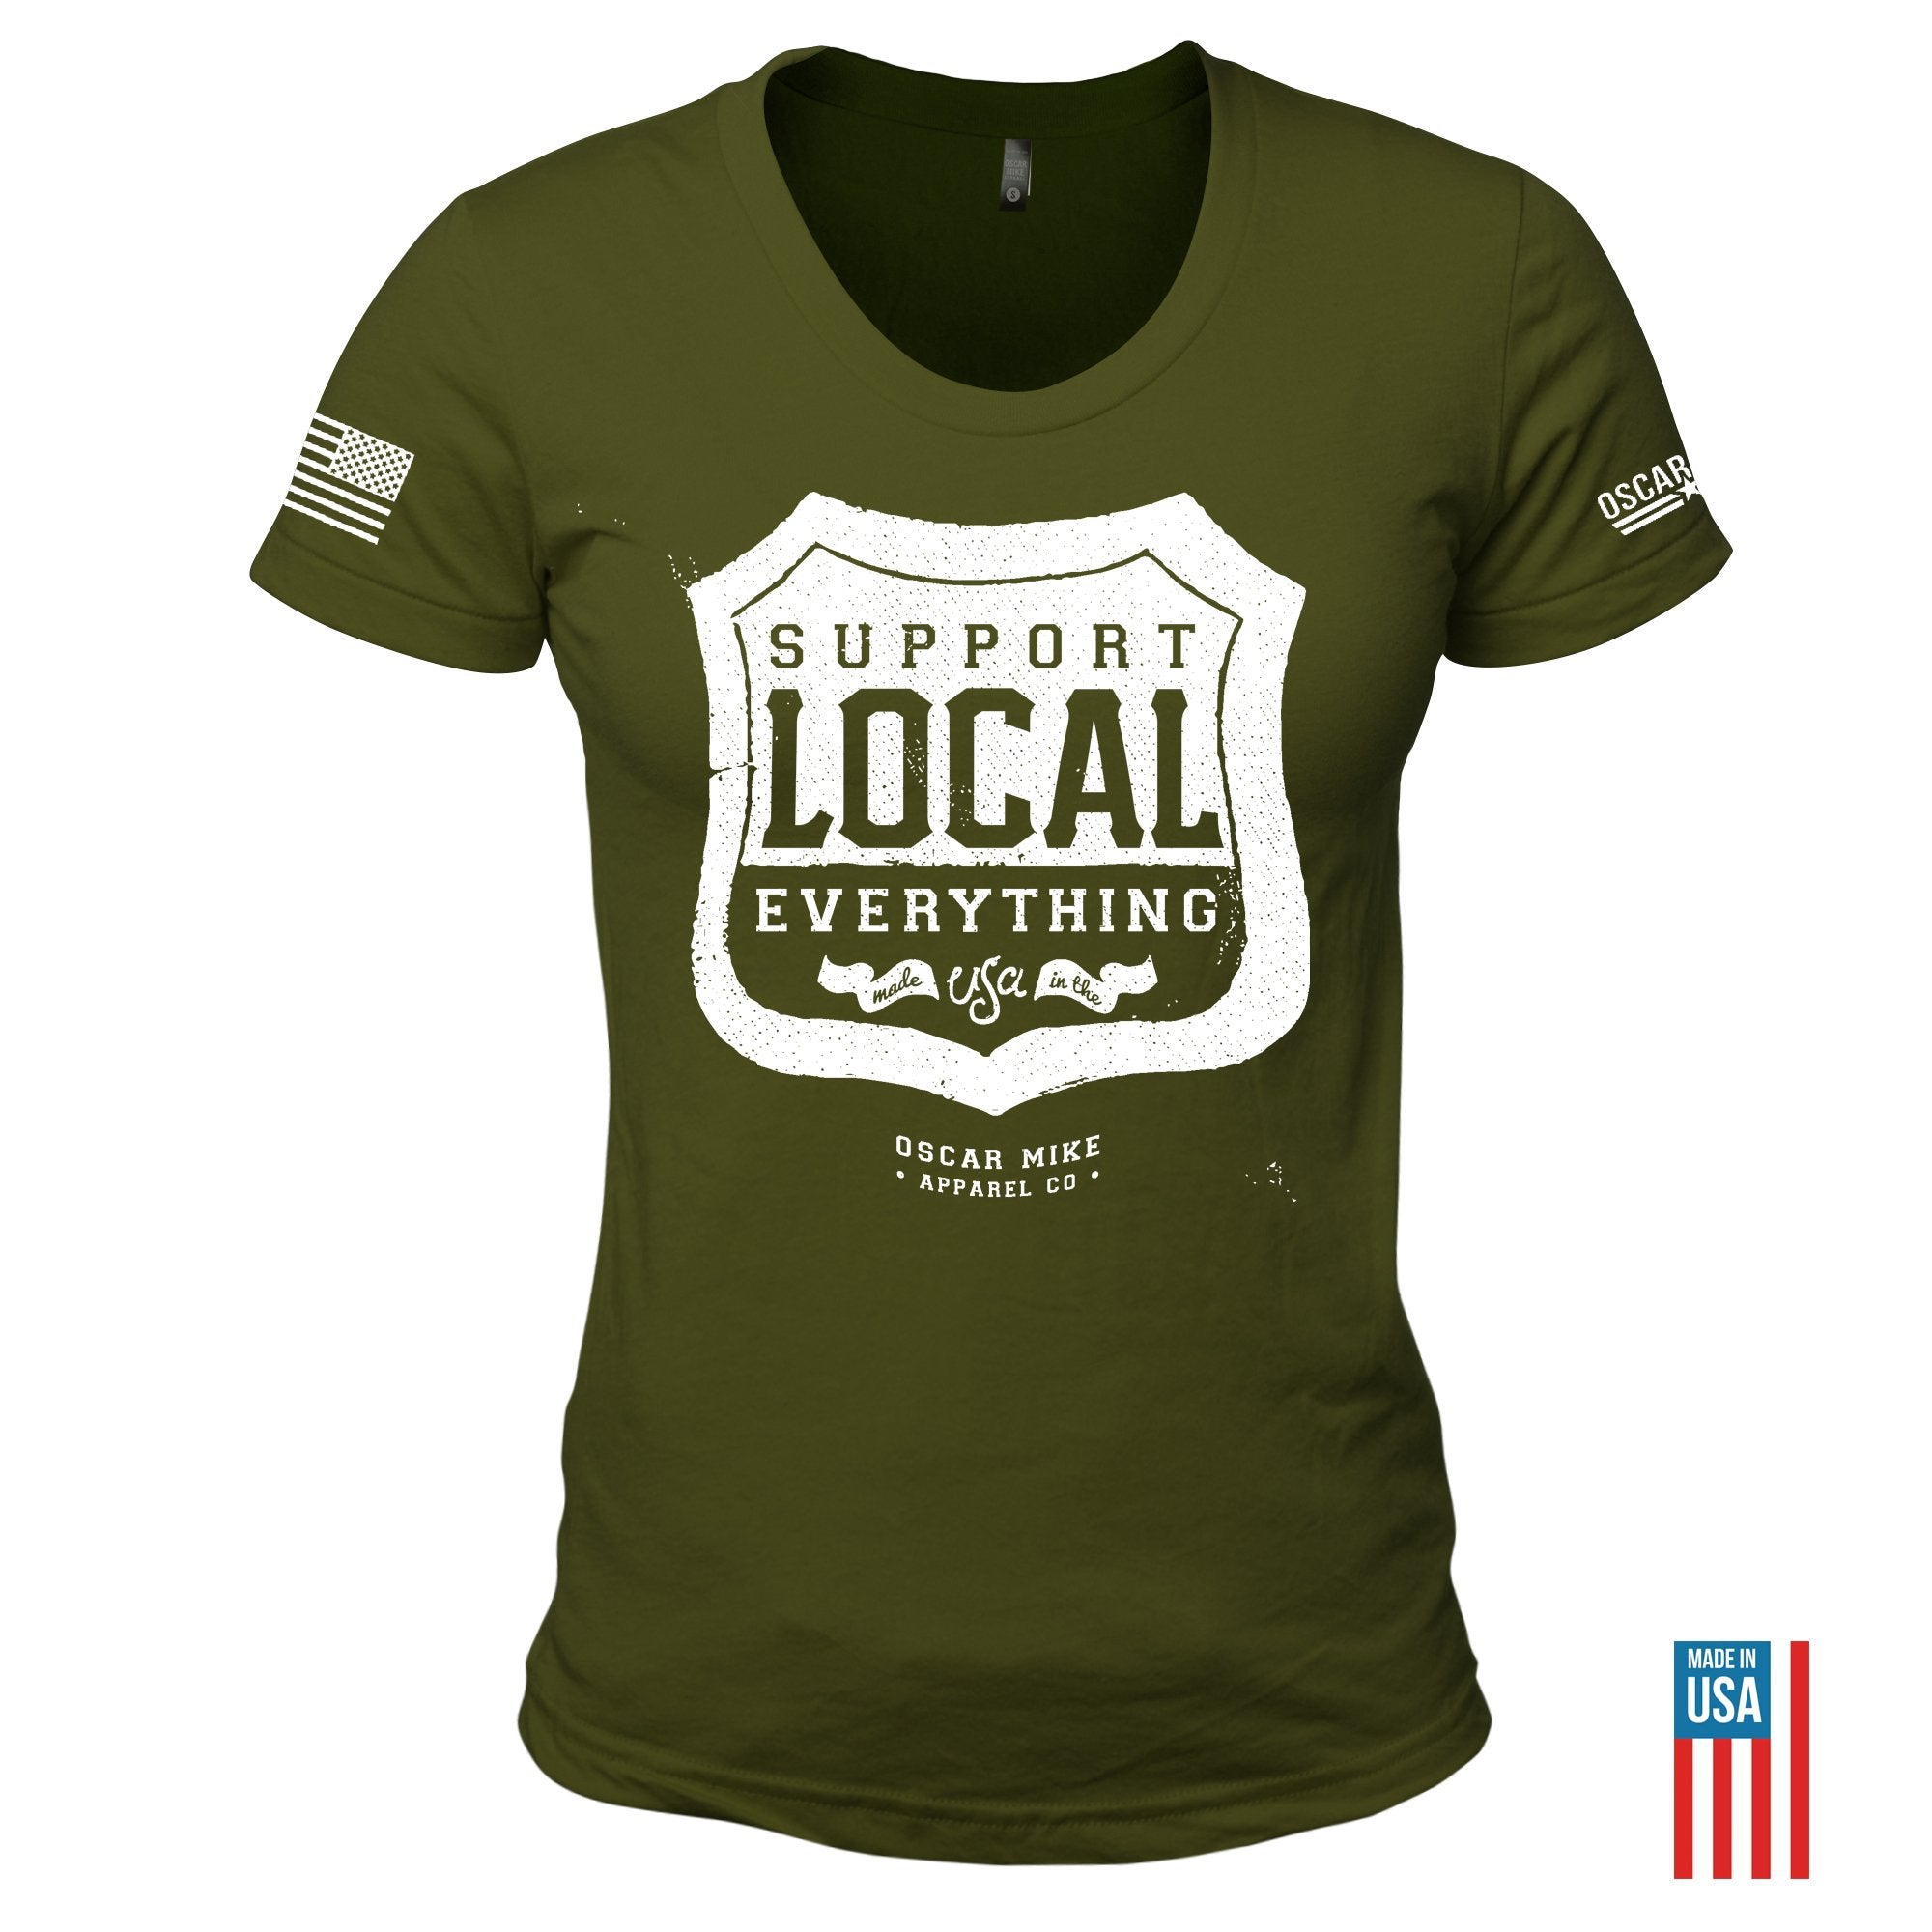 Women's Support Local Everything Tee